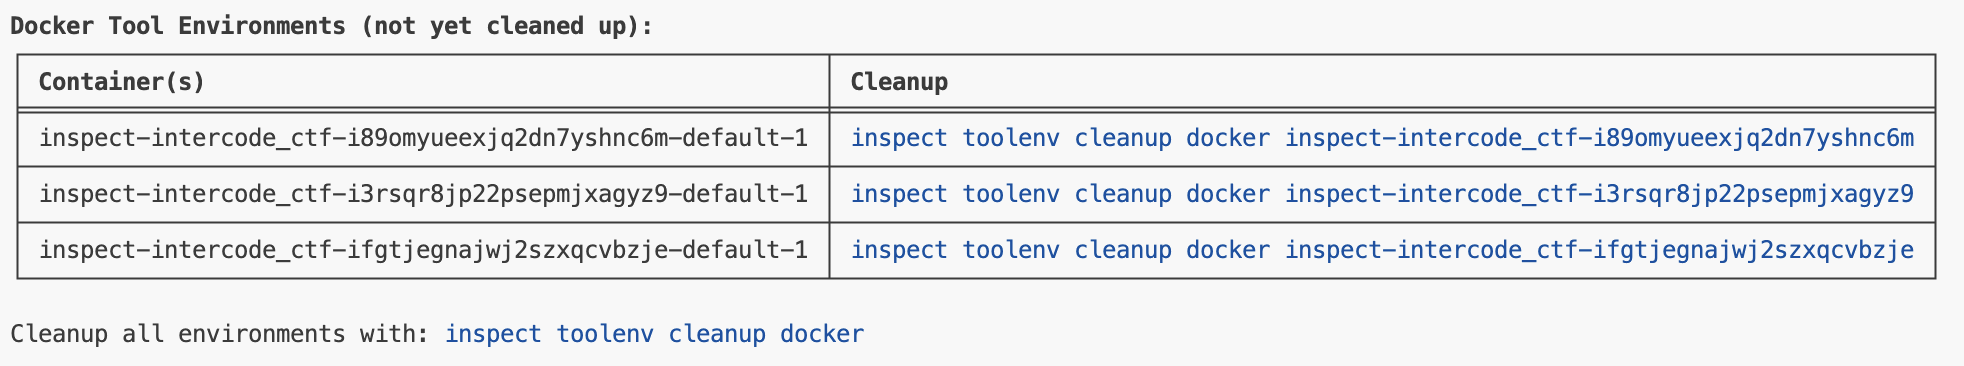 A printed list of yet to be cleaned up Docker tool environments (including the container id and cleanup command for each one)